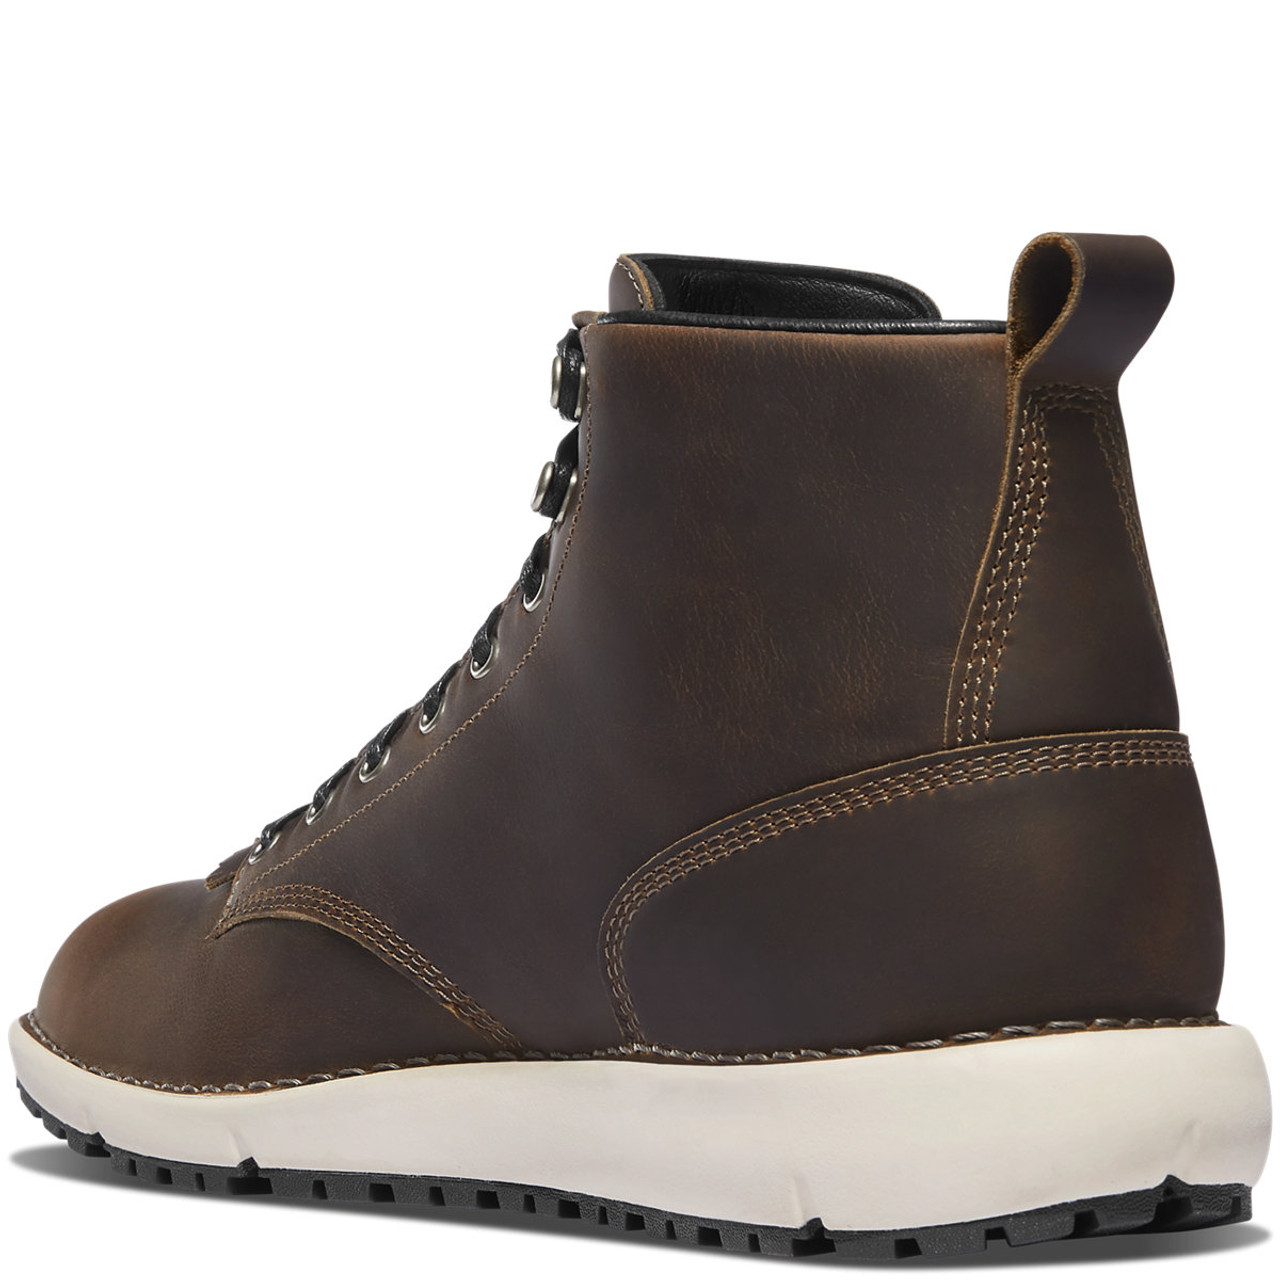 DANNER® LOGGER 917 CHOCOLATE CHIP OUTDOOR BOOTS 34650